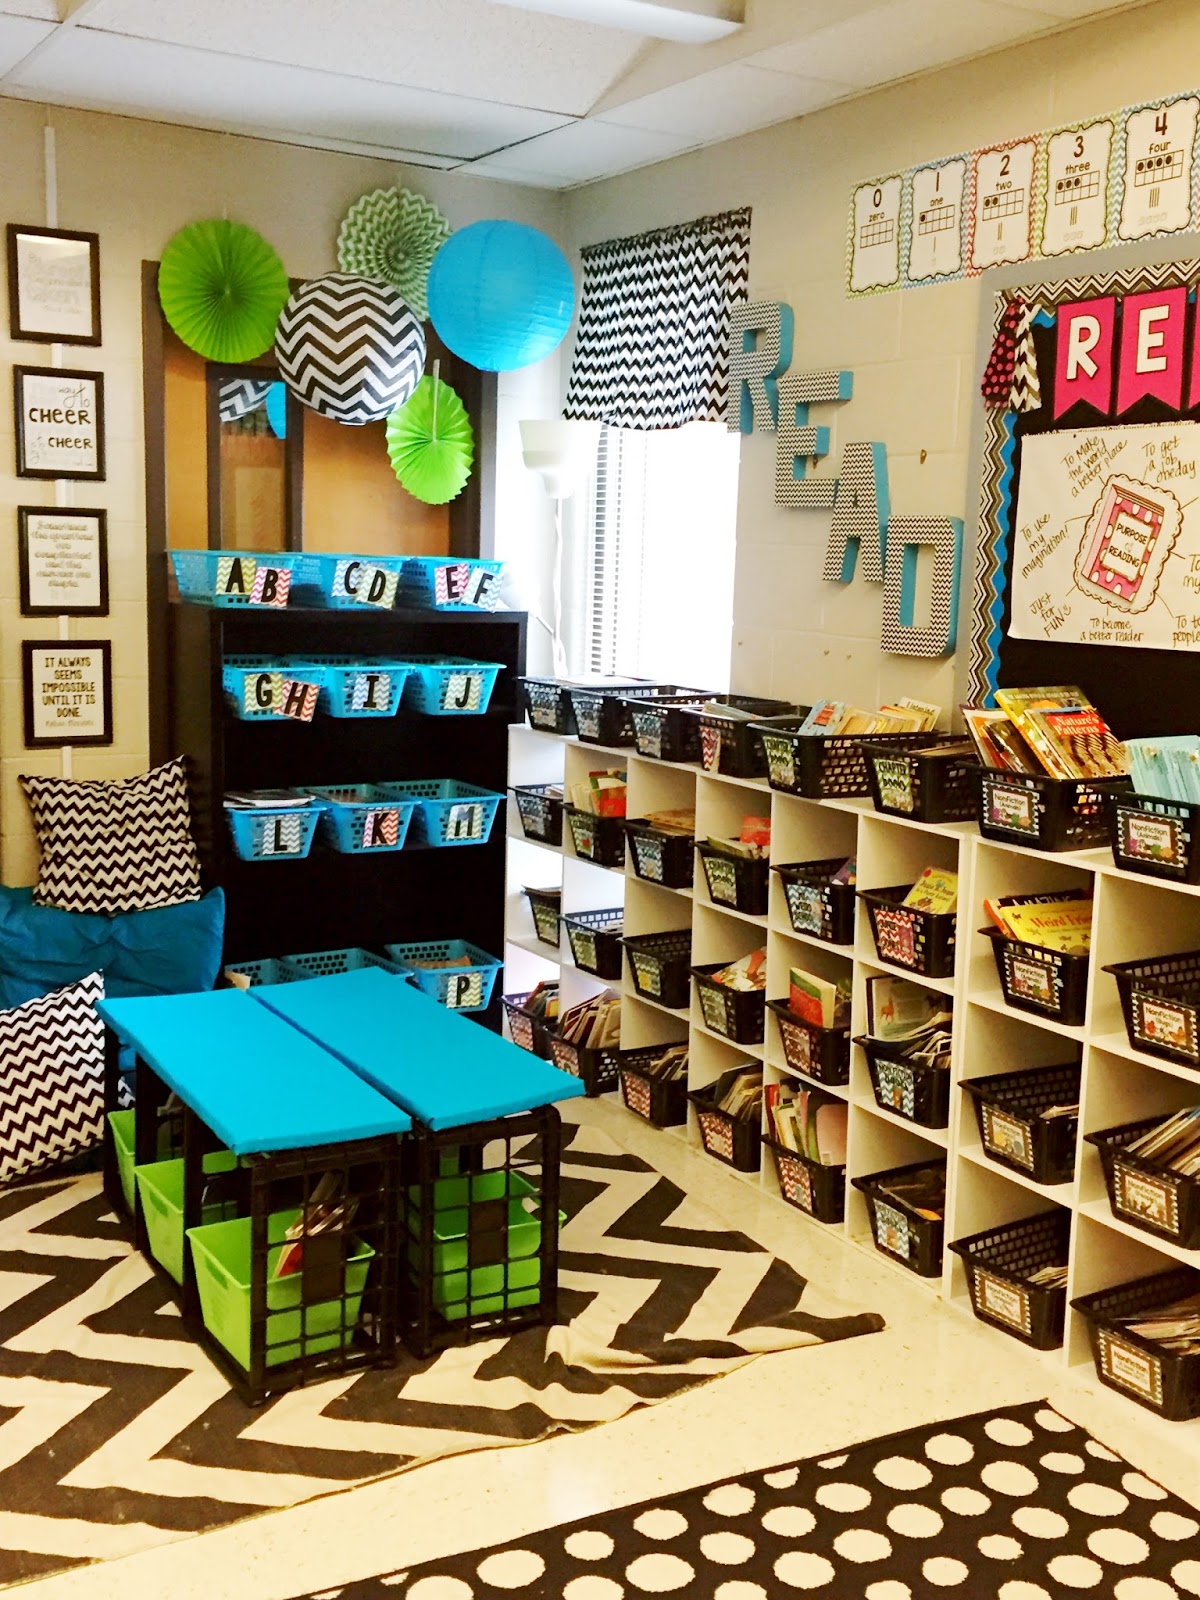 Come On In to my 1st Grade Classroom!